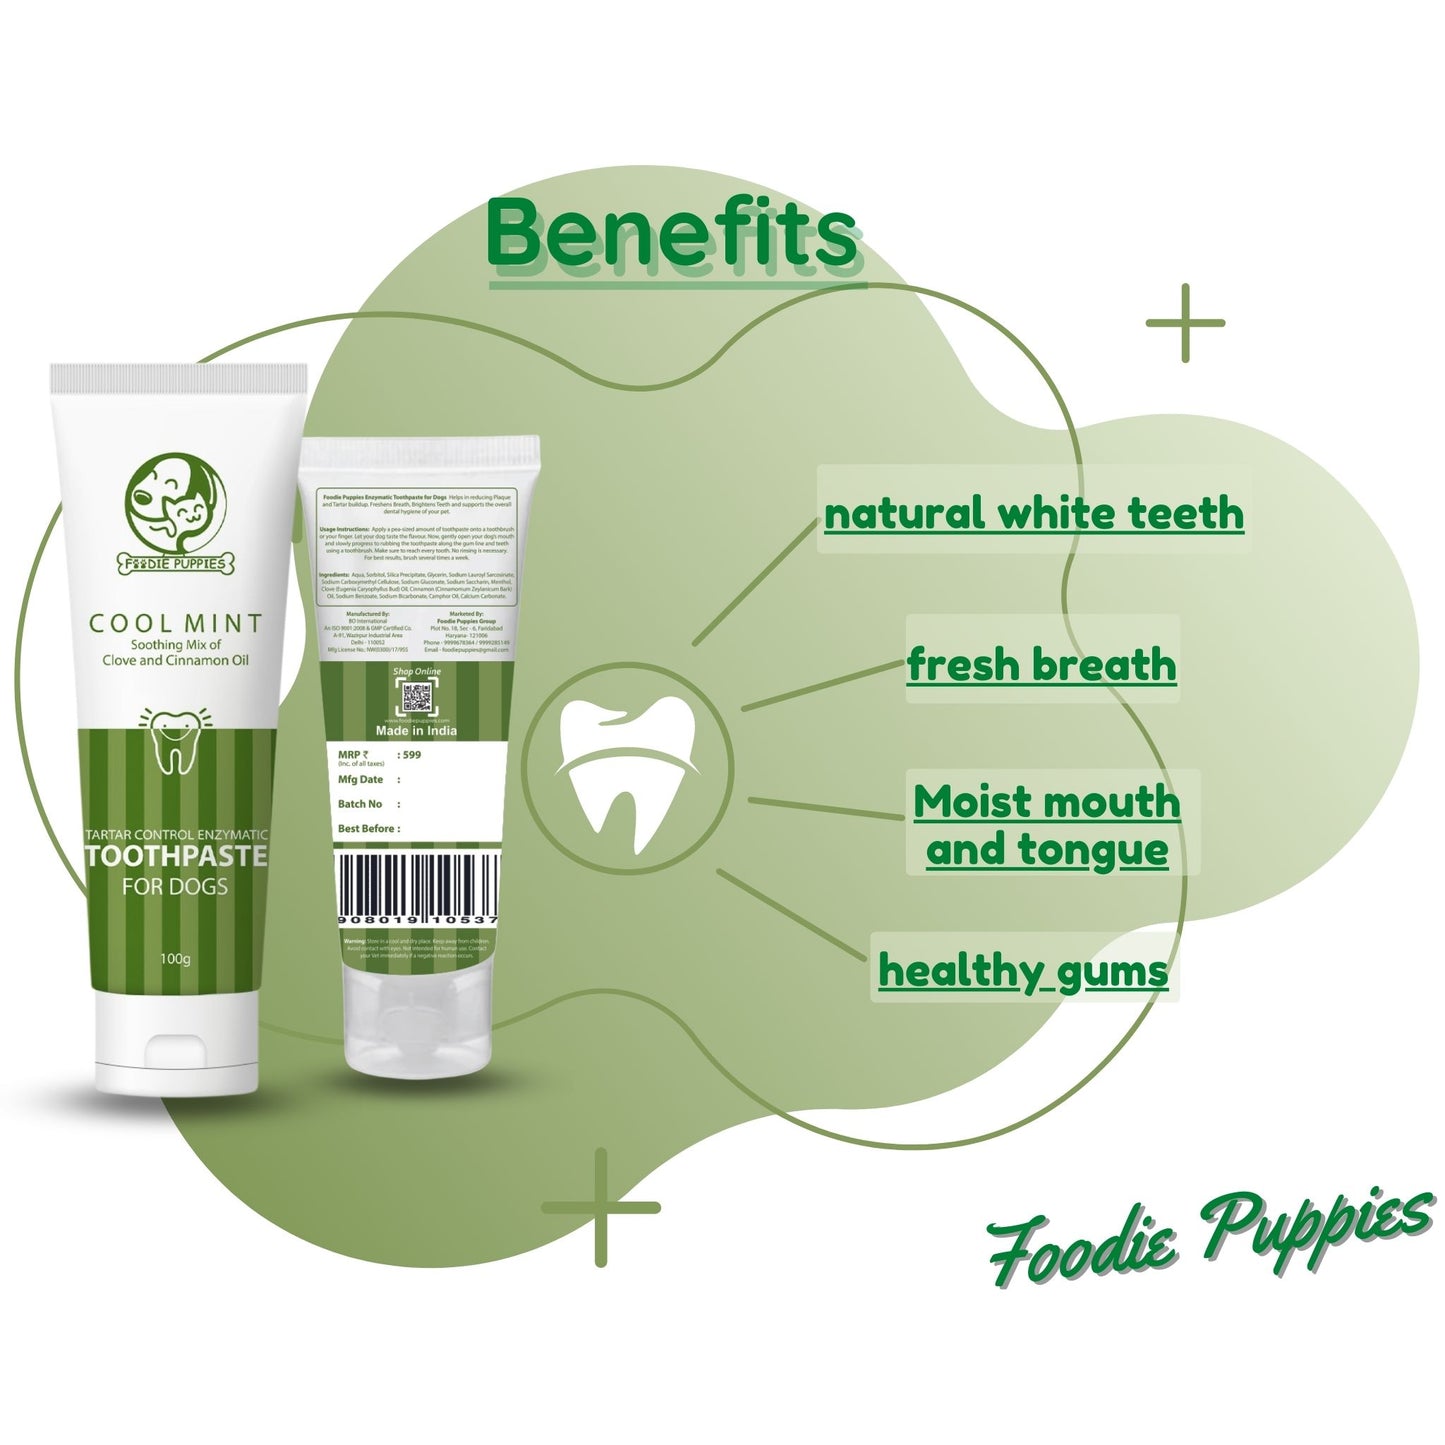 Foodie Puppies Dental Care Cool Mint Toothpaste for Dog & Puppy - 100g